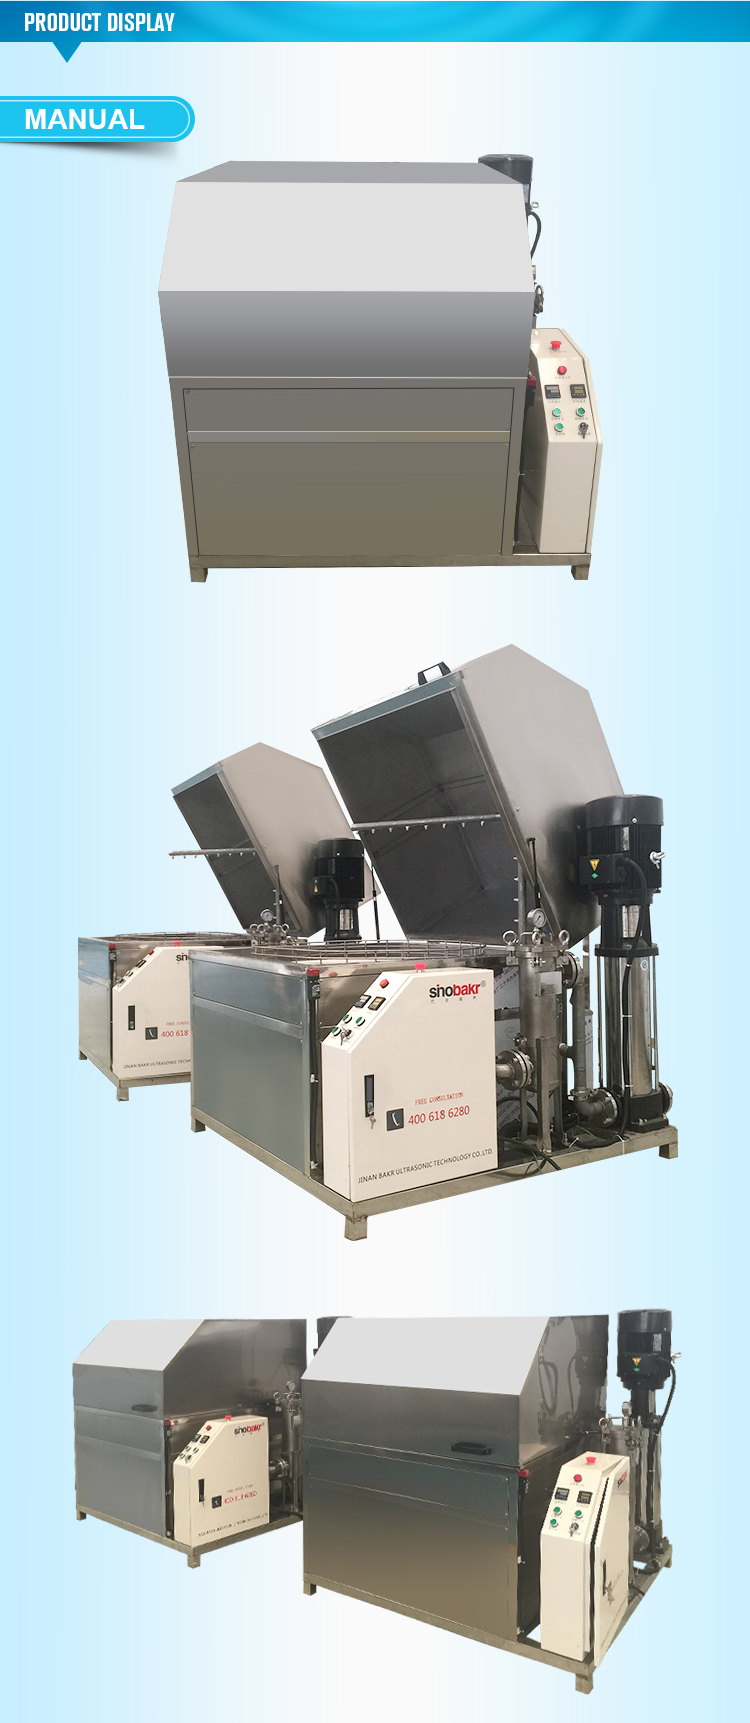 Top Quality Supplier Wholesale Fot Sale Digital Display High Pressure Cleaning Machine